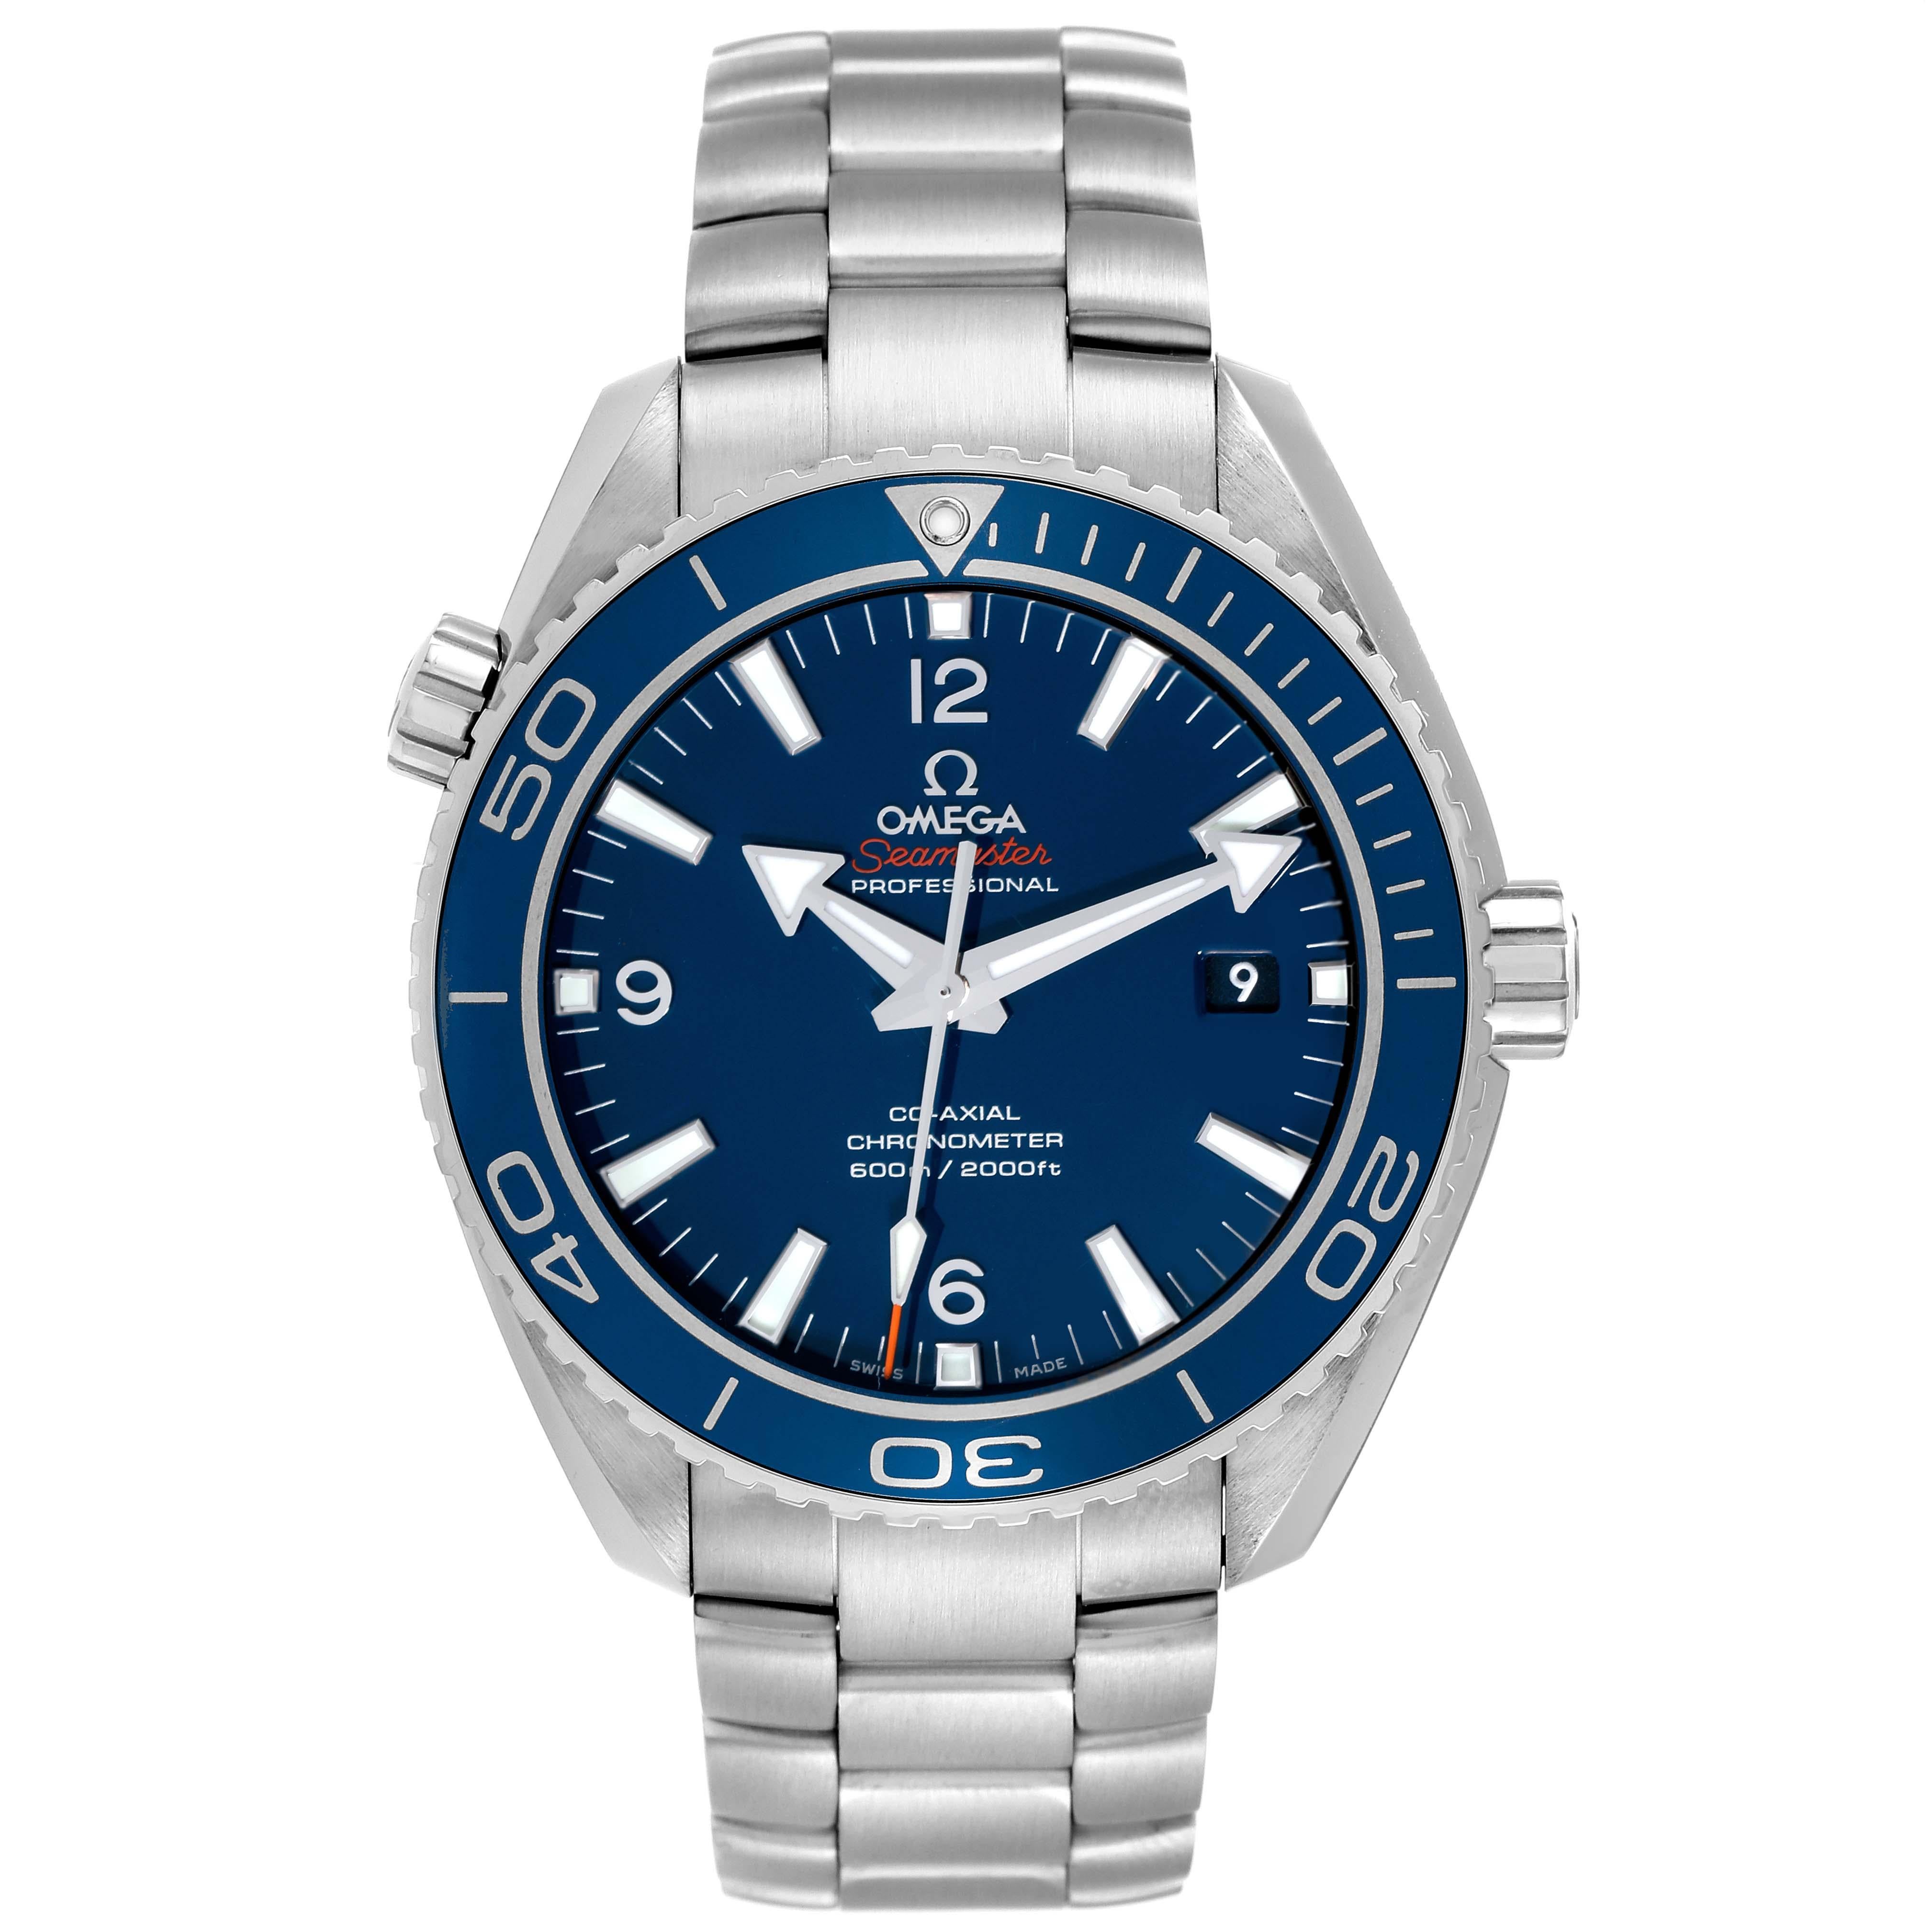 Omega Seamaster Planet Ocean Titanium Mens Watch 232.90.46.21.03.001 Card. Automatic self-winding chronometer movement with Co-Axial Escapement. Free sprung-balance, 2 barrels mounted in series, automatic winding in both directions to reduce winding